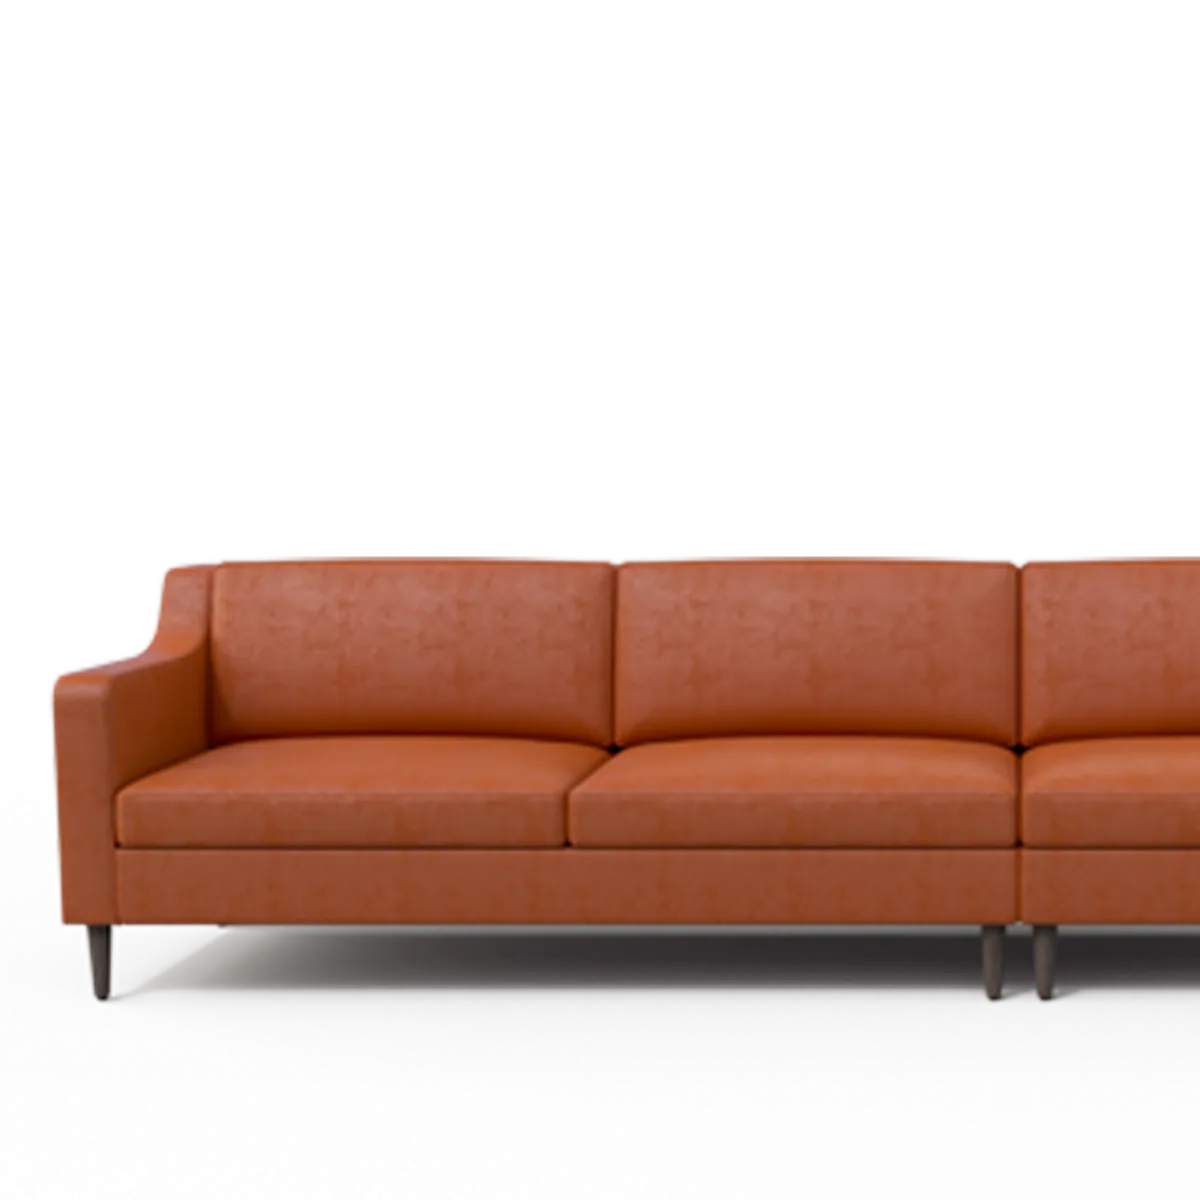 Elias Sofa Inside Out Contracts Bespoke